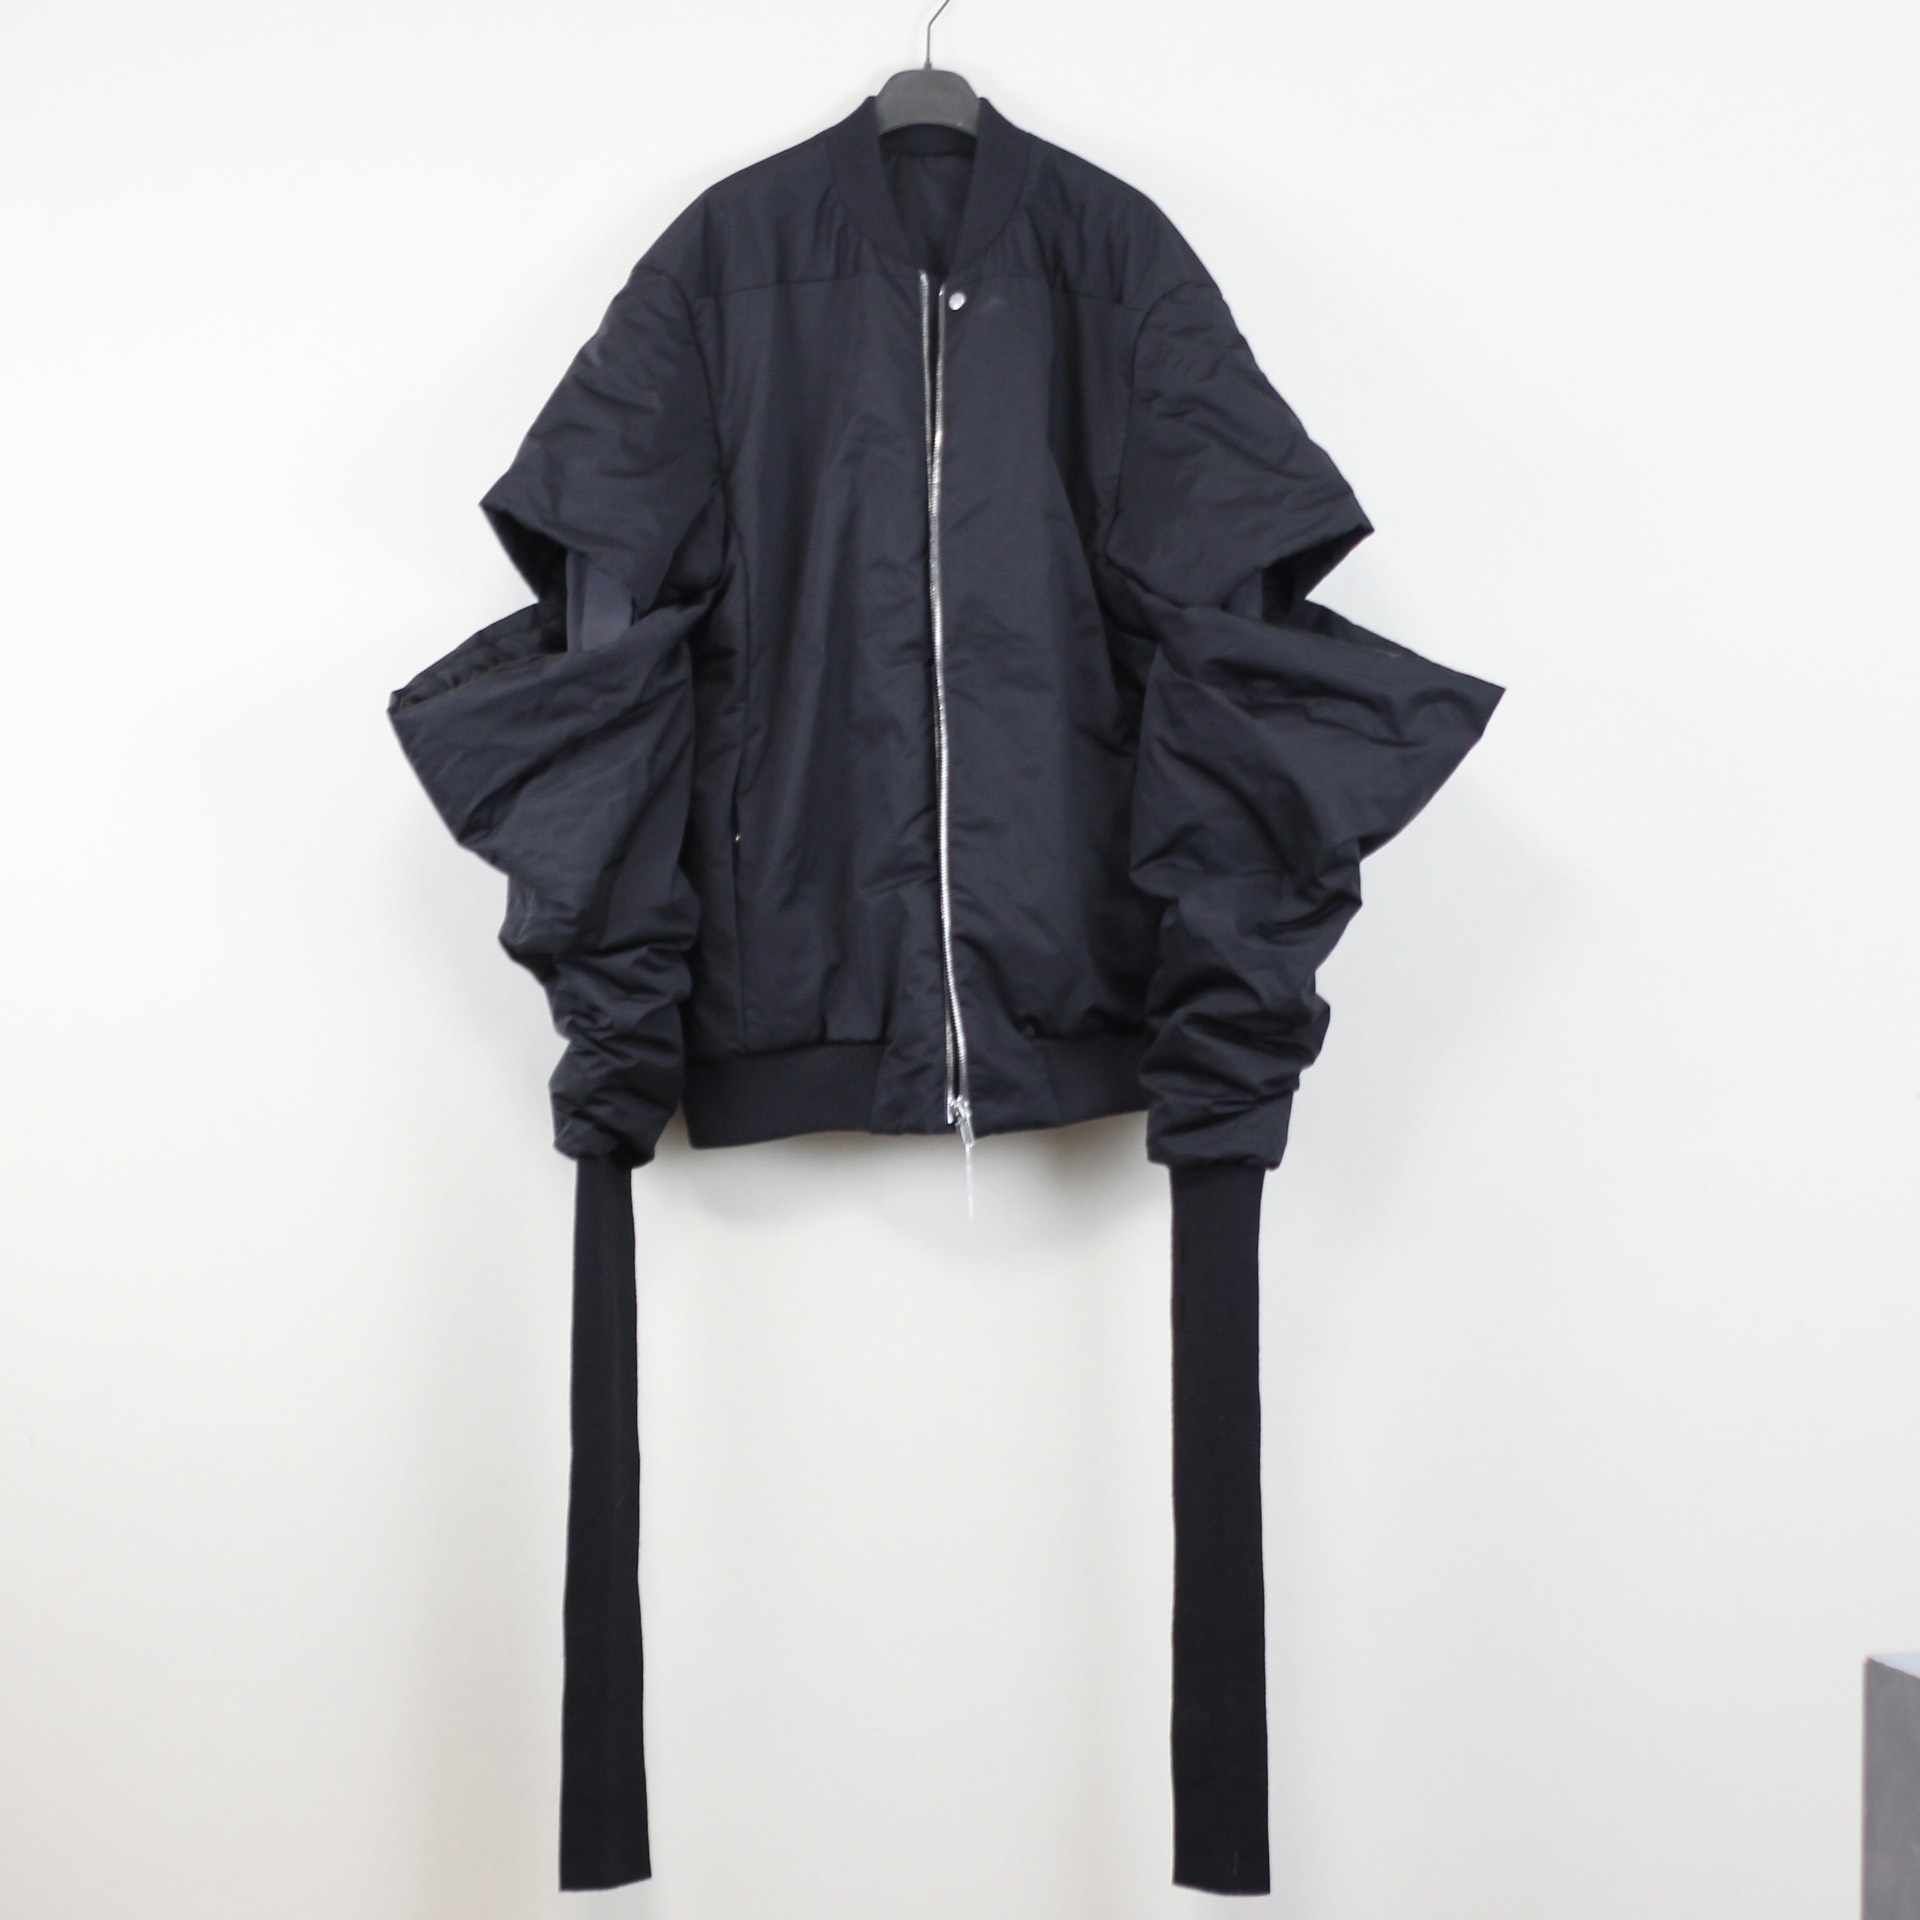 Rick owens bomber jacket with extra long gauntlet sleeves - 1